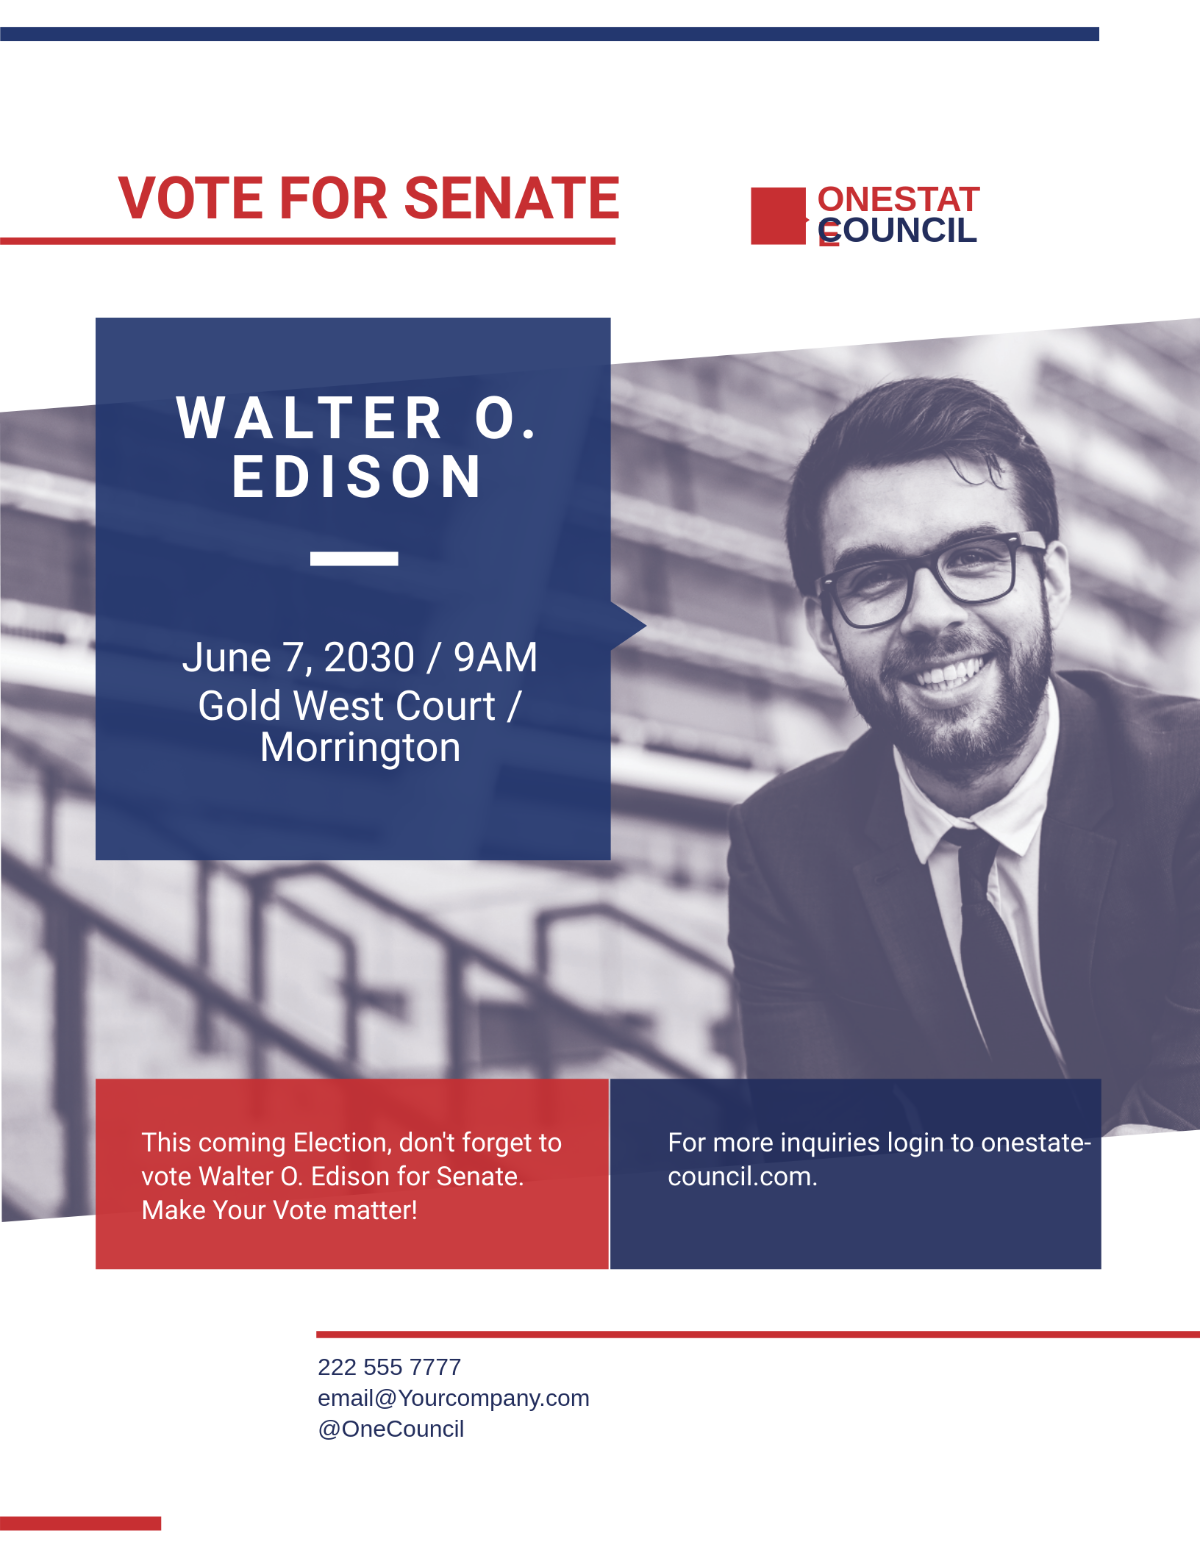 Political Voting Flyer Template